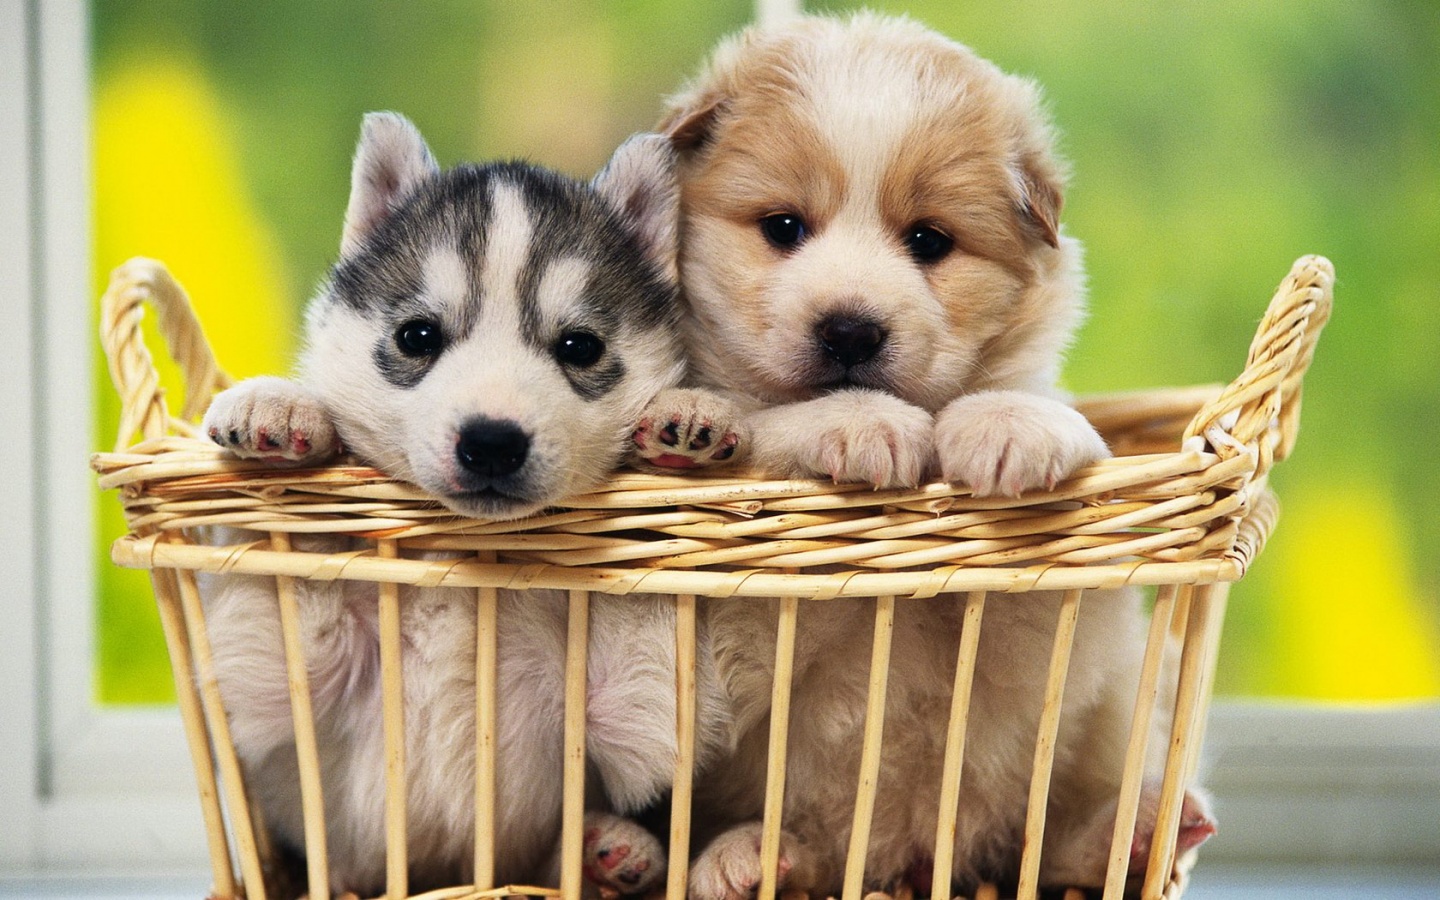 Free download Cute Dogs Wallpapers Cute Dogs Wallpapers Free ...